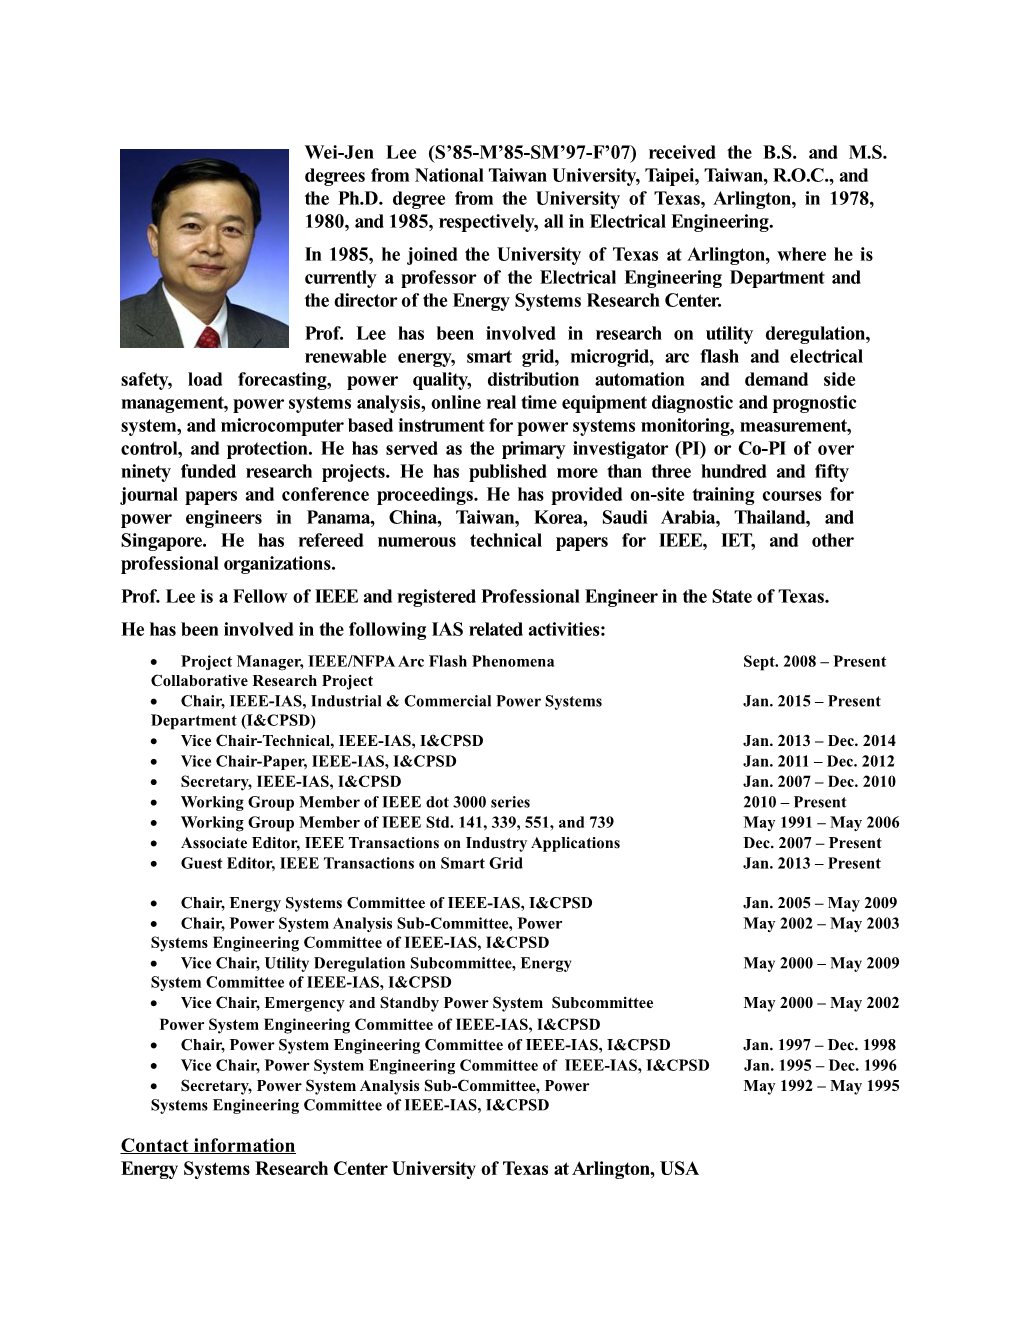 Prof. Lee Is a Fellow of IEEE and Registered Professional Engineer in the State of Texas